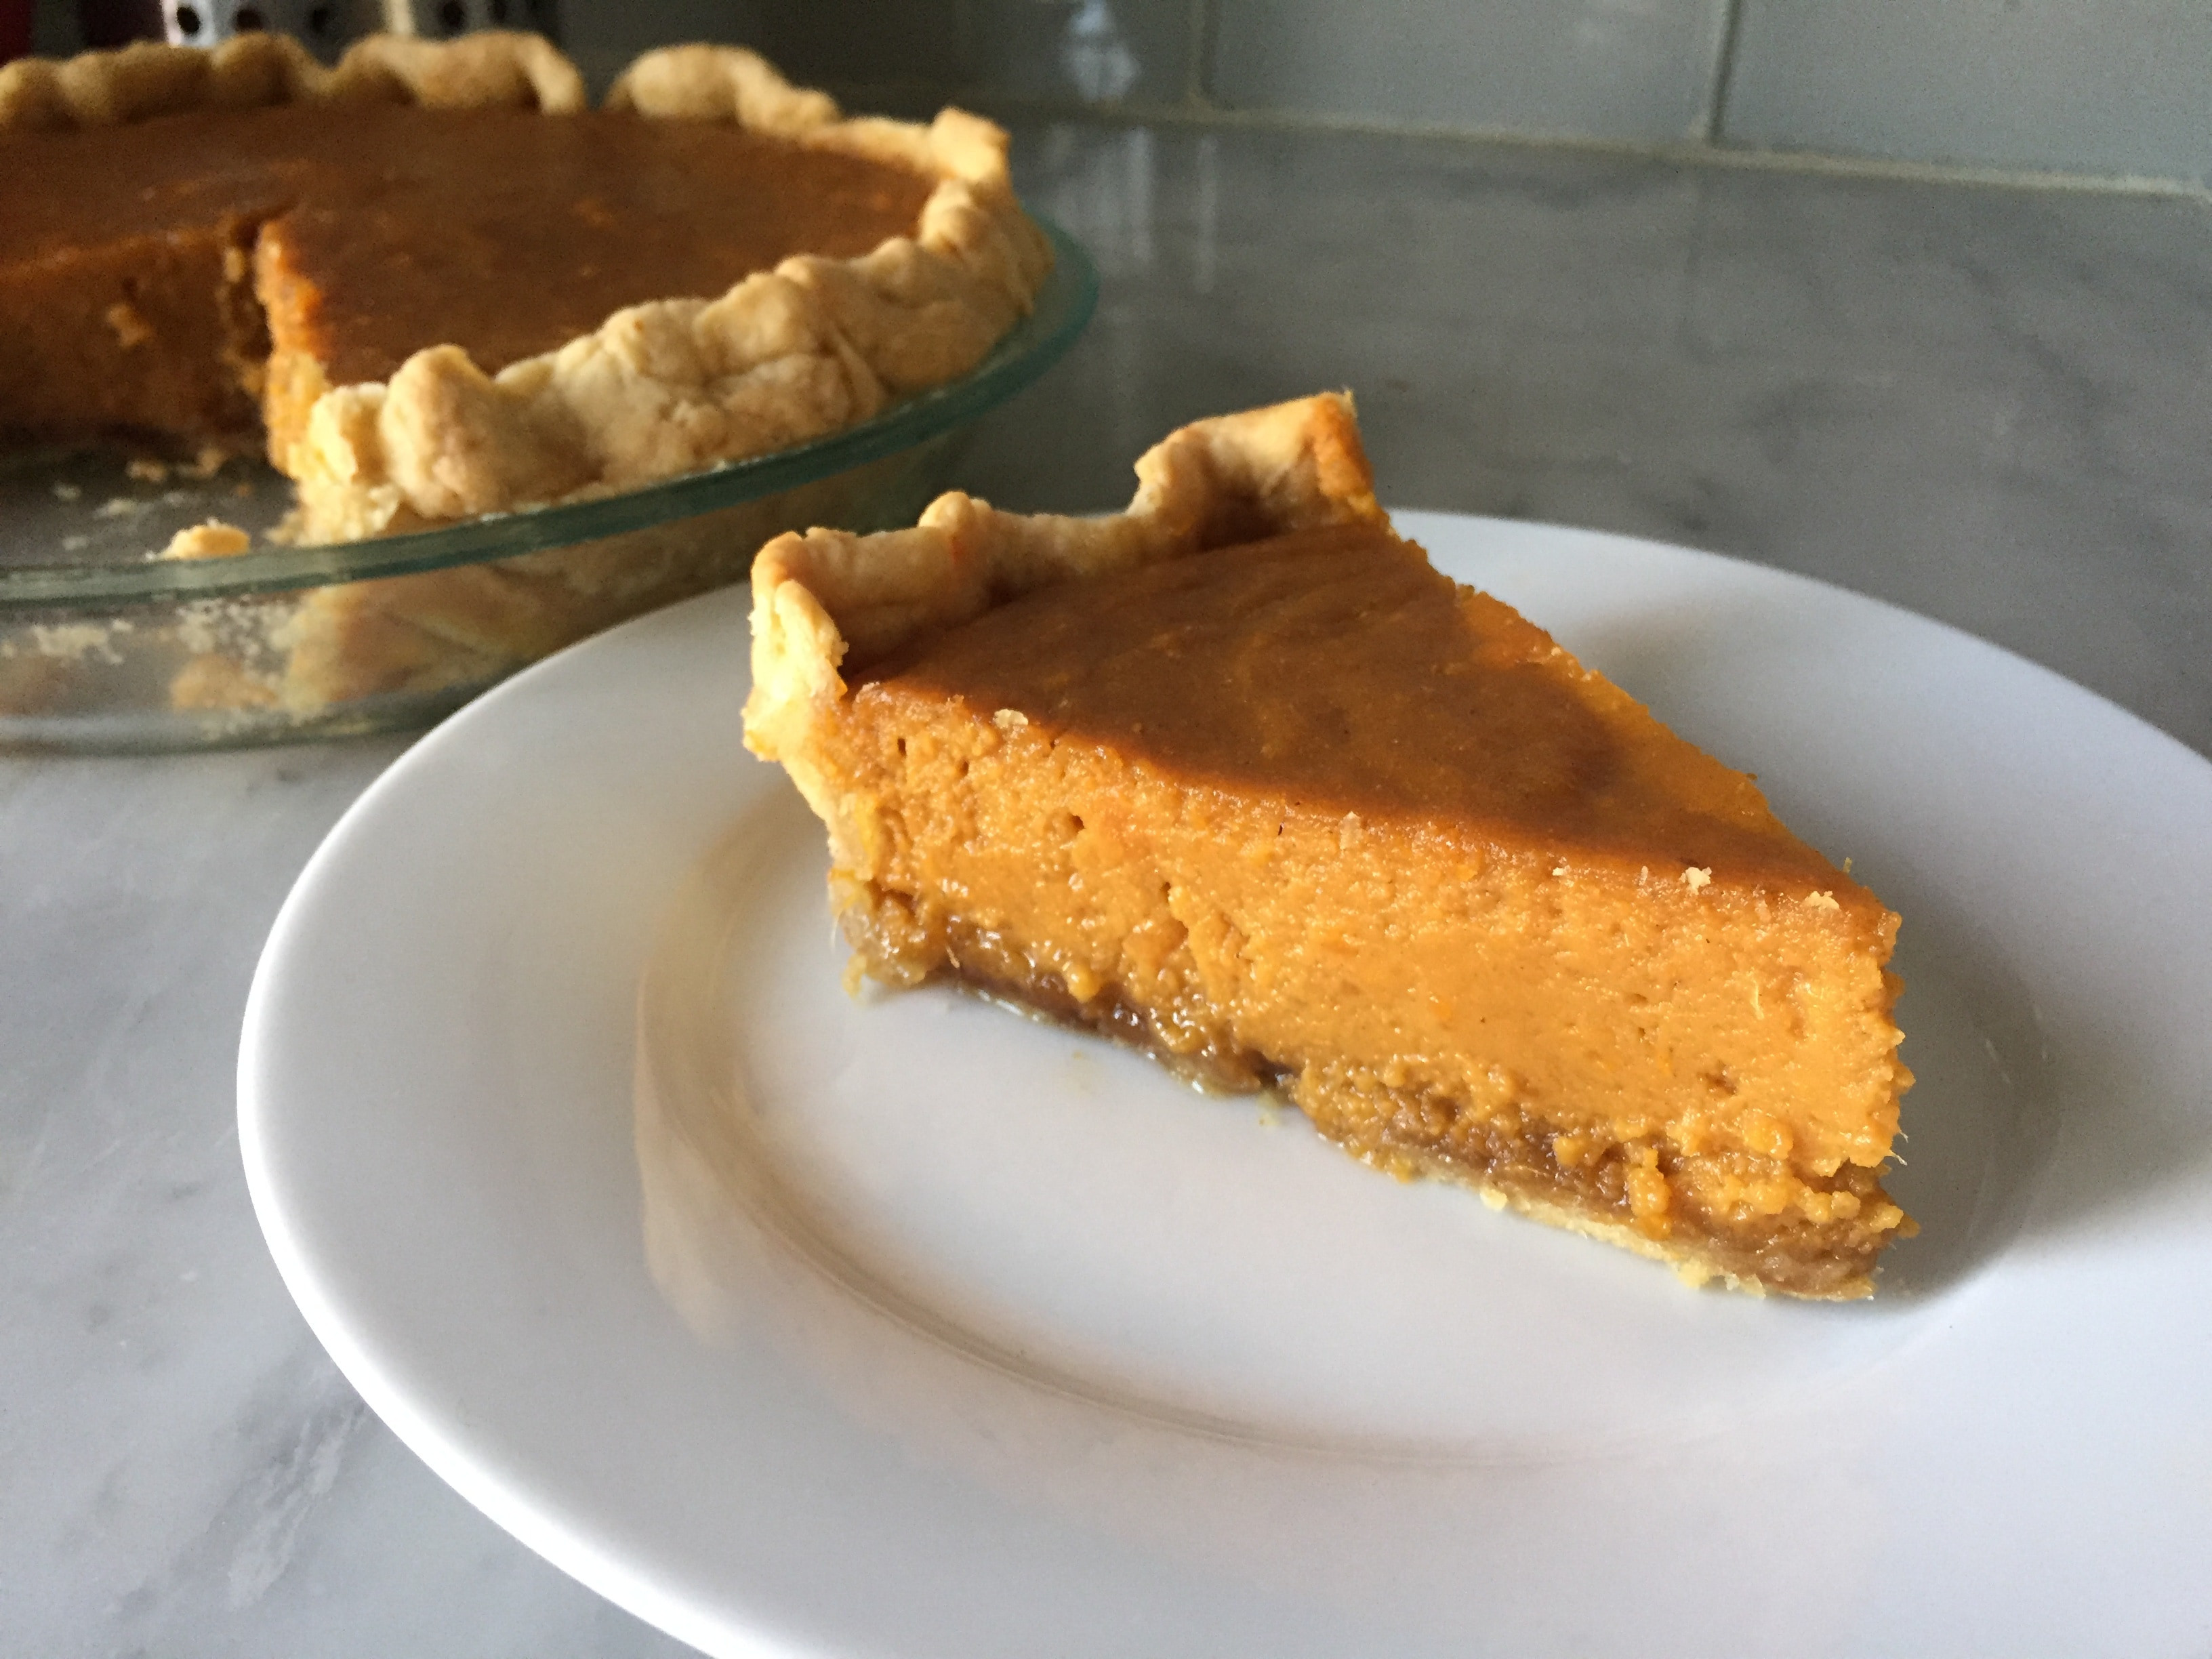 How To Make Sweet Potato Pie
 Here’s how to make Patti LaBelle’s sweet potato pie at